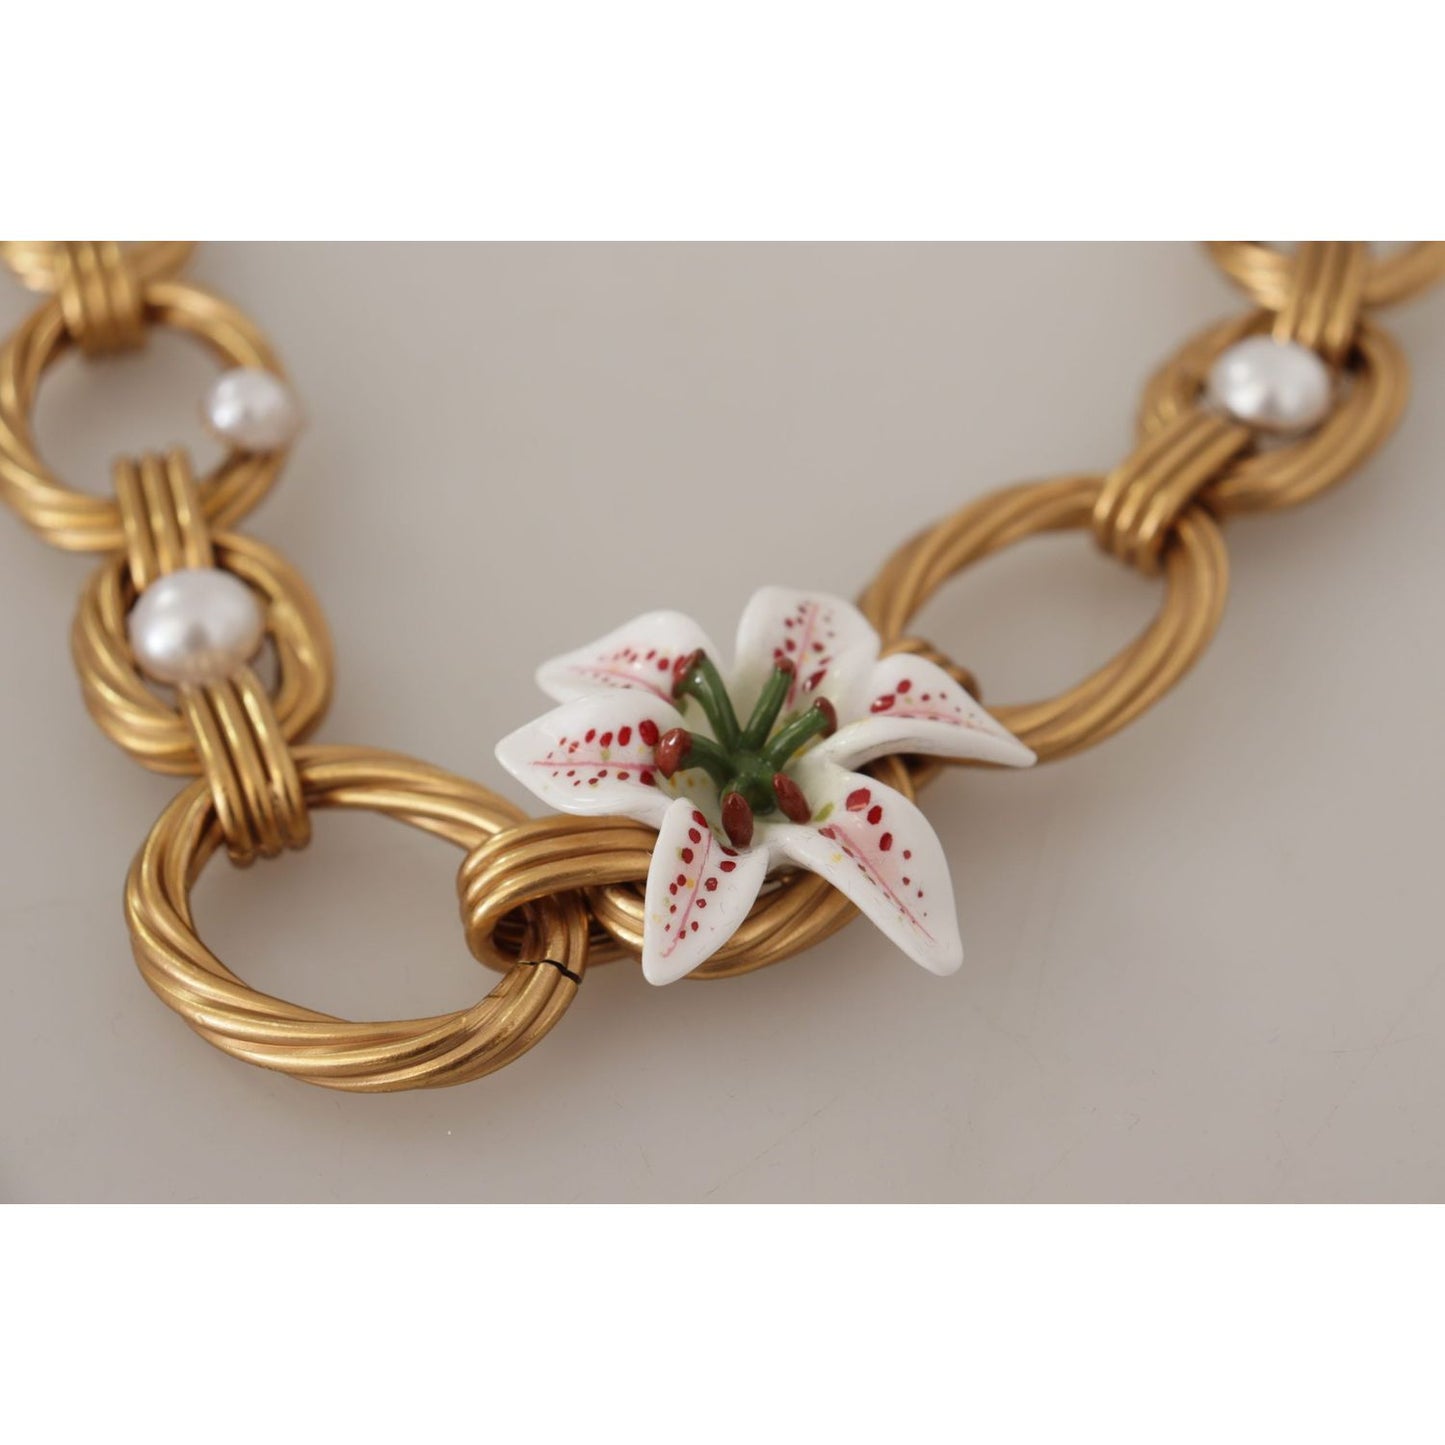 Dolce & Gabbana Elegant Gold Lilly Flower Pendant Necklace gold-white-lily-floral-chain-statement-necklace WOMAN NECKLACE IMG_3810-scaled-0fad5c61-67a.jpg